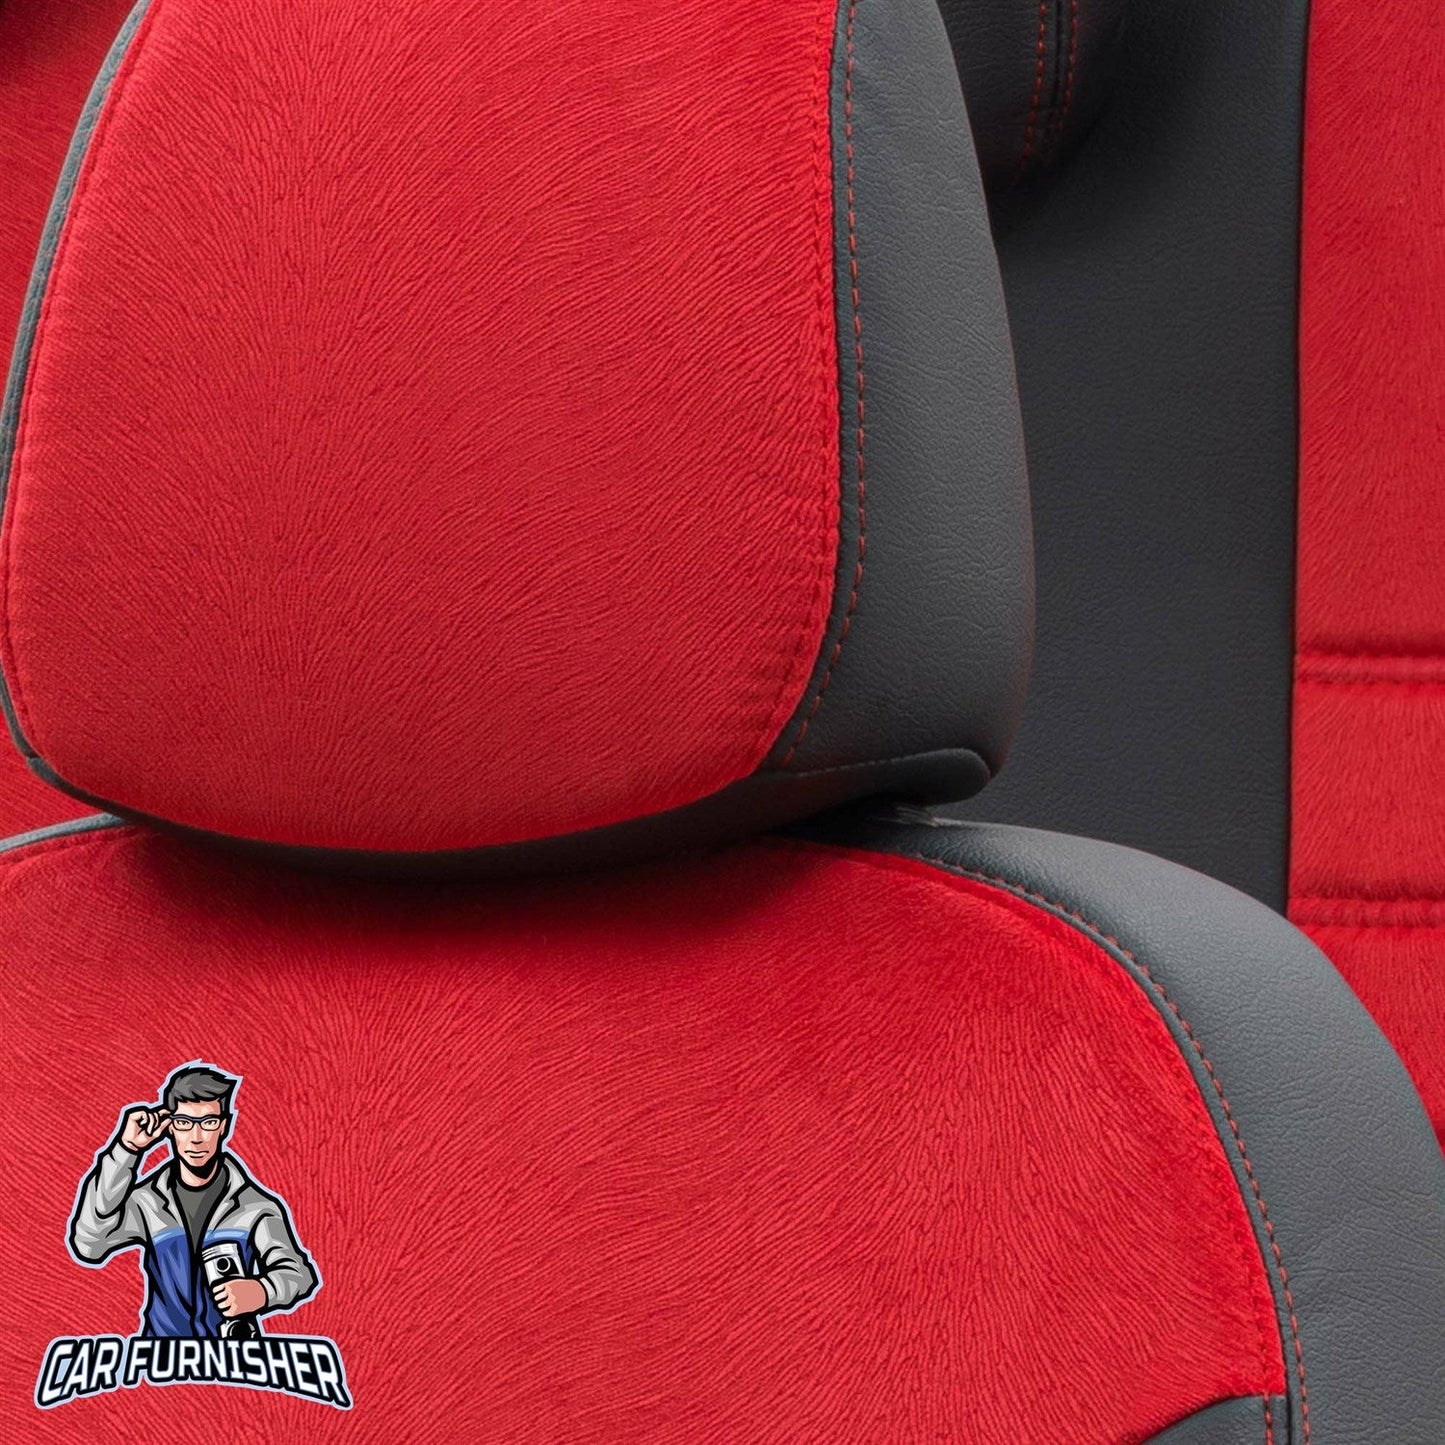 Volkswagen Caddy Seat Cover London Foal Feather Design Red Leather & Foal Feather